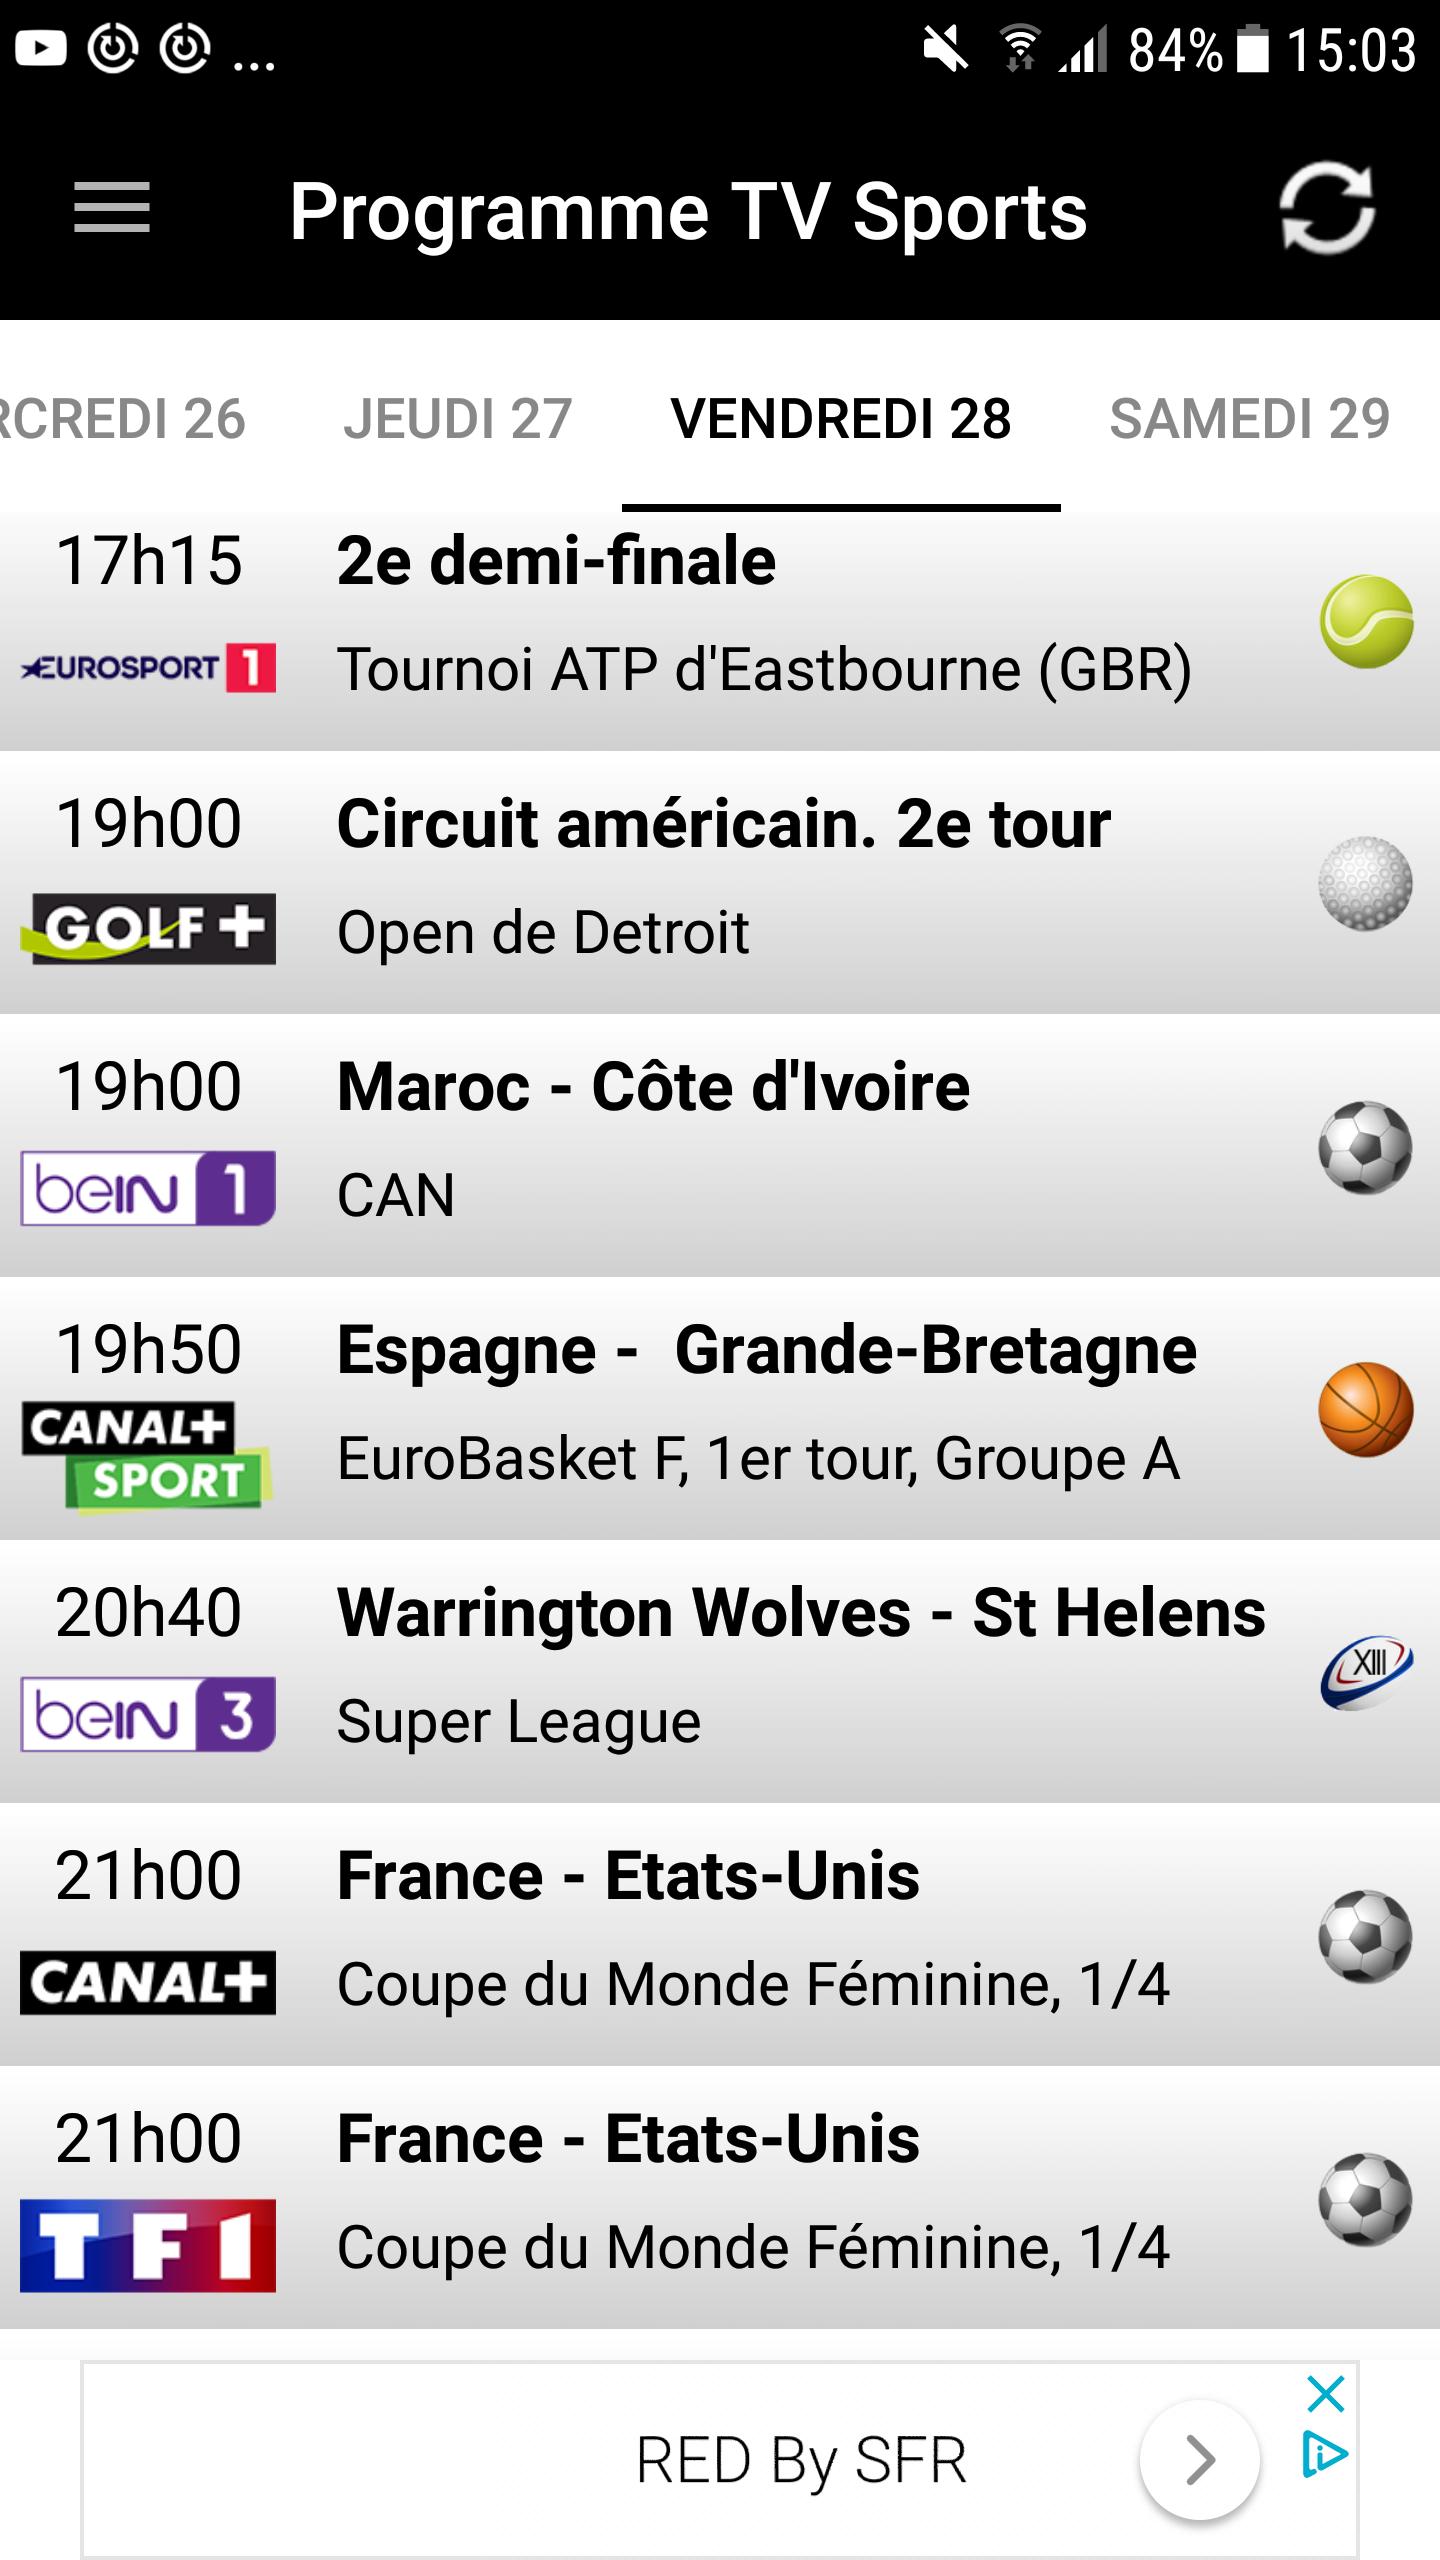 Programme TV Sports for Android - APK Download